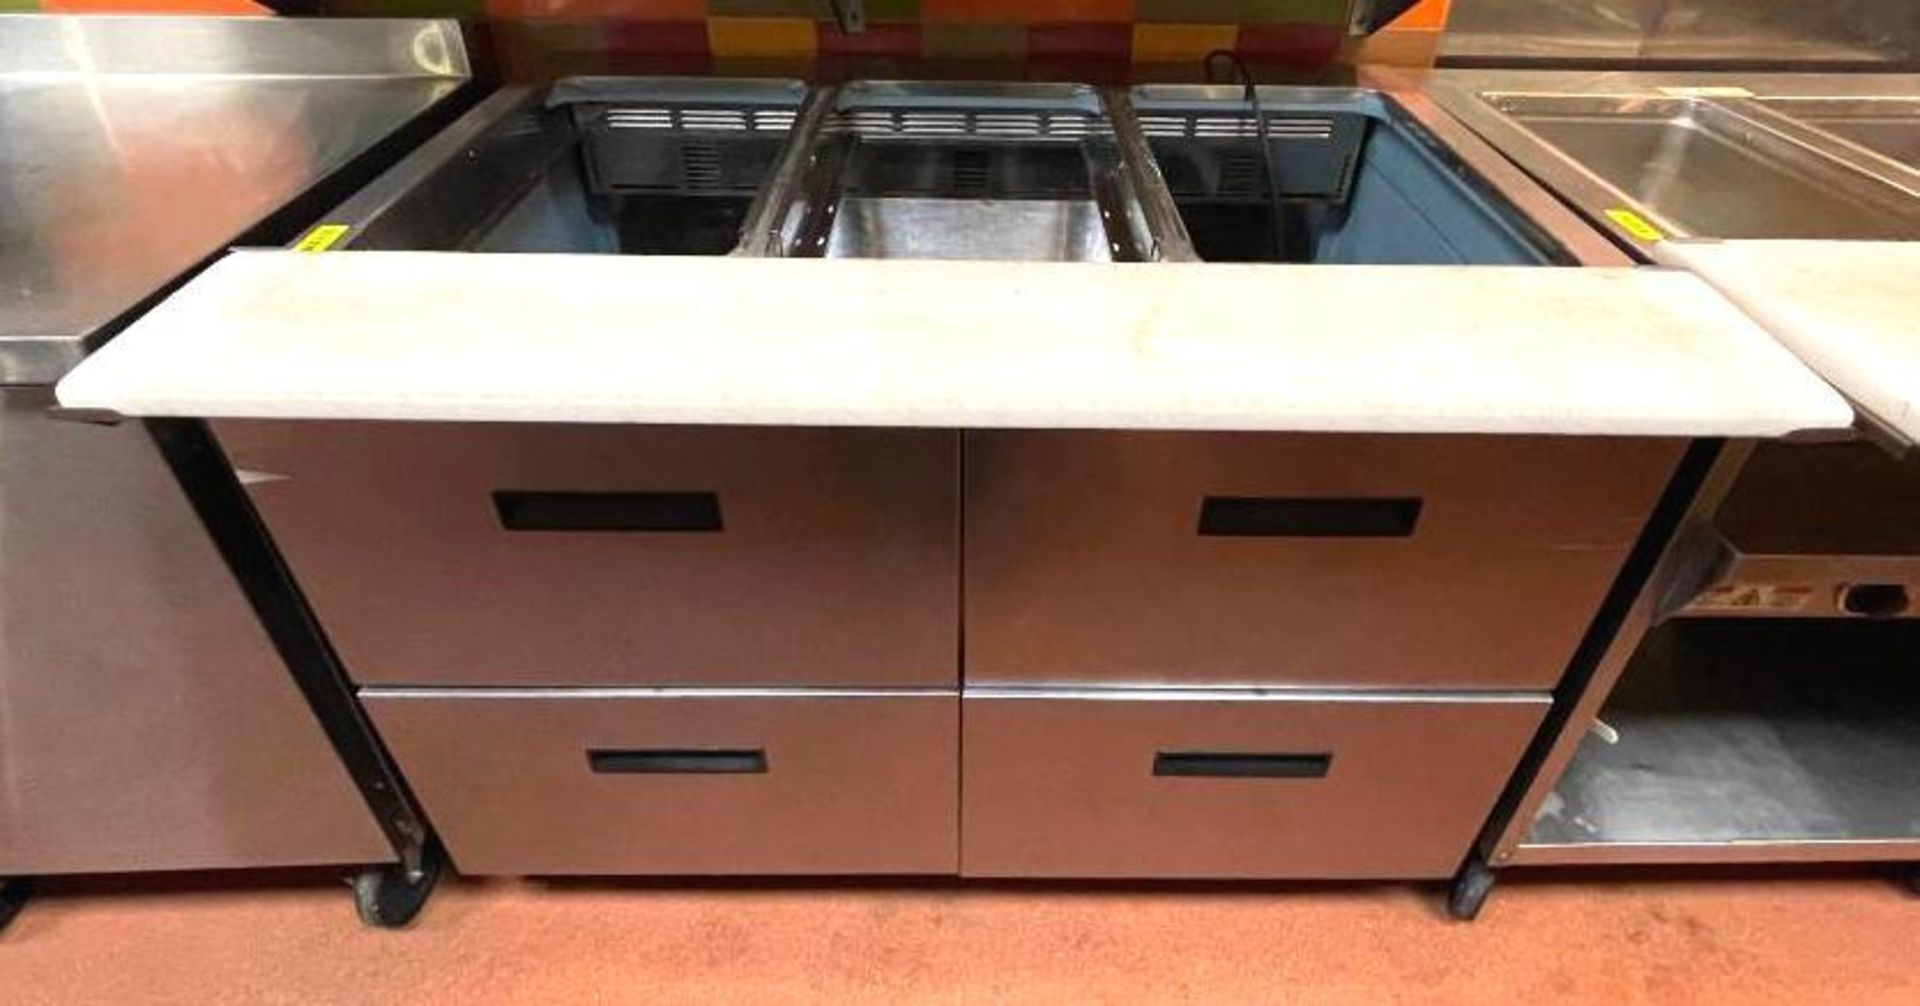 DESCRIPTION 4-DRAWER REFRIGERATED SANDWICH PREP TABLE WITH 3-WELLS (NO COVER) BRAND/MODEL DELFIELD D